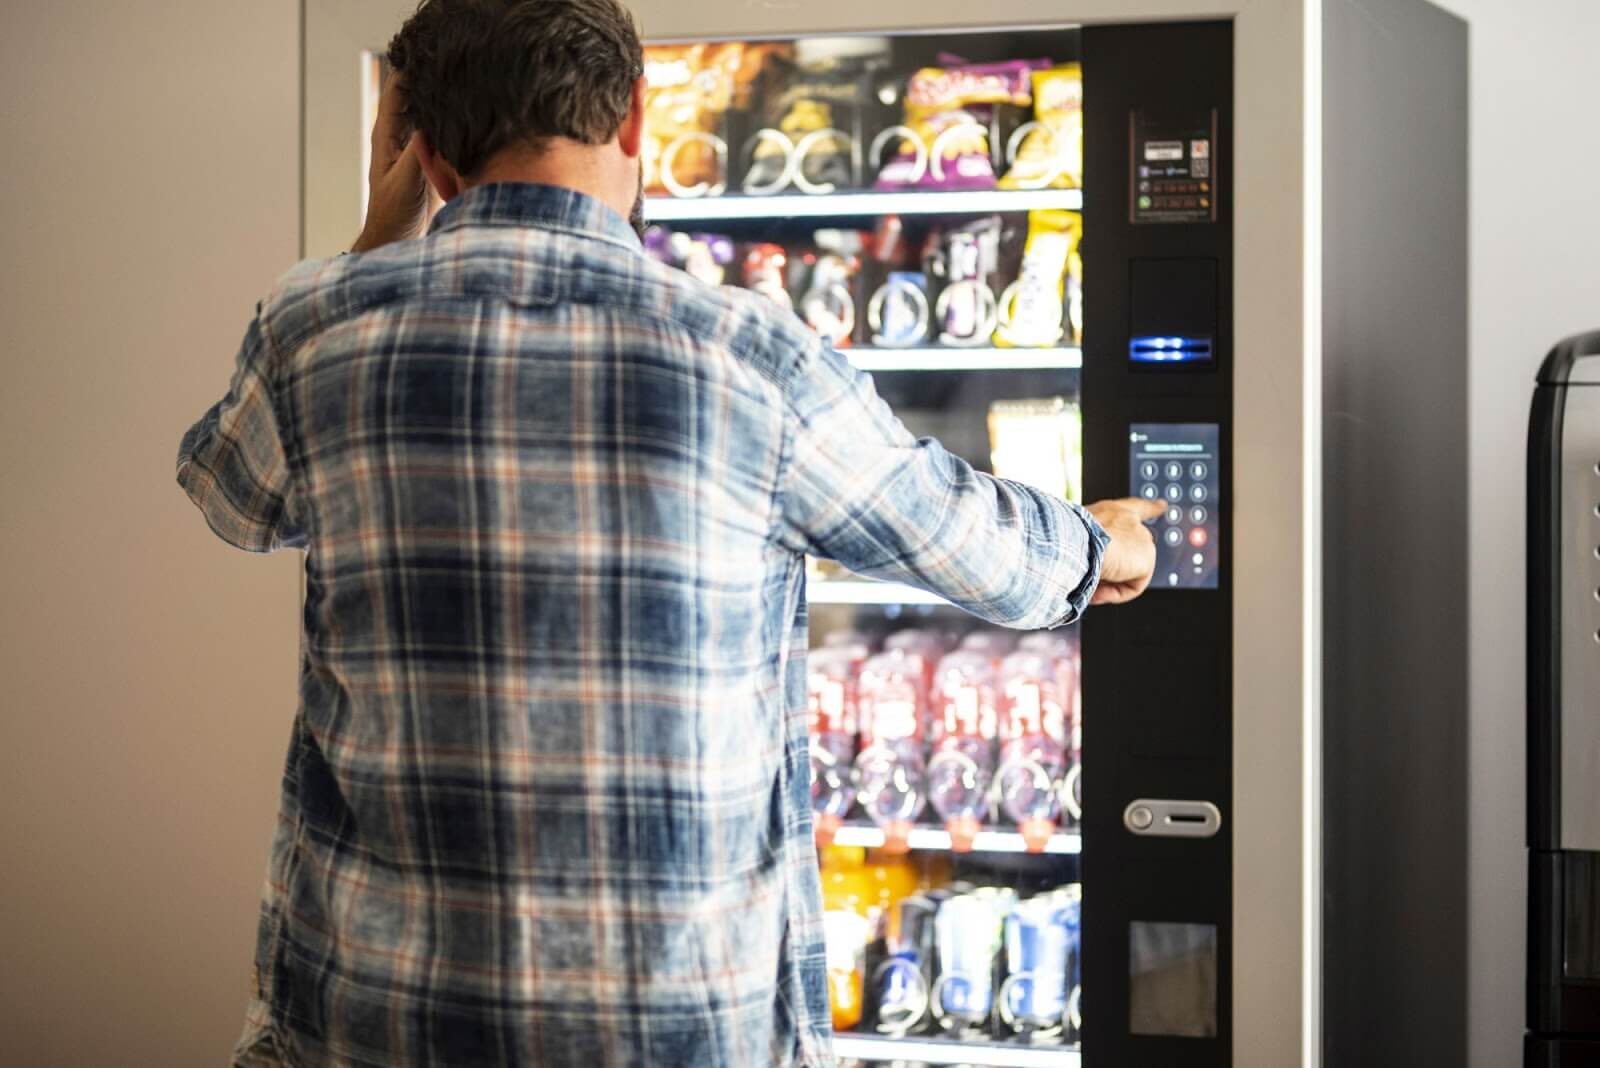 What You Need to Know About Maintaining Your Own Vending Machines